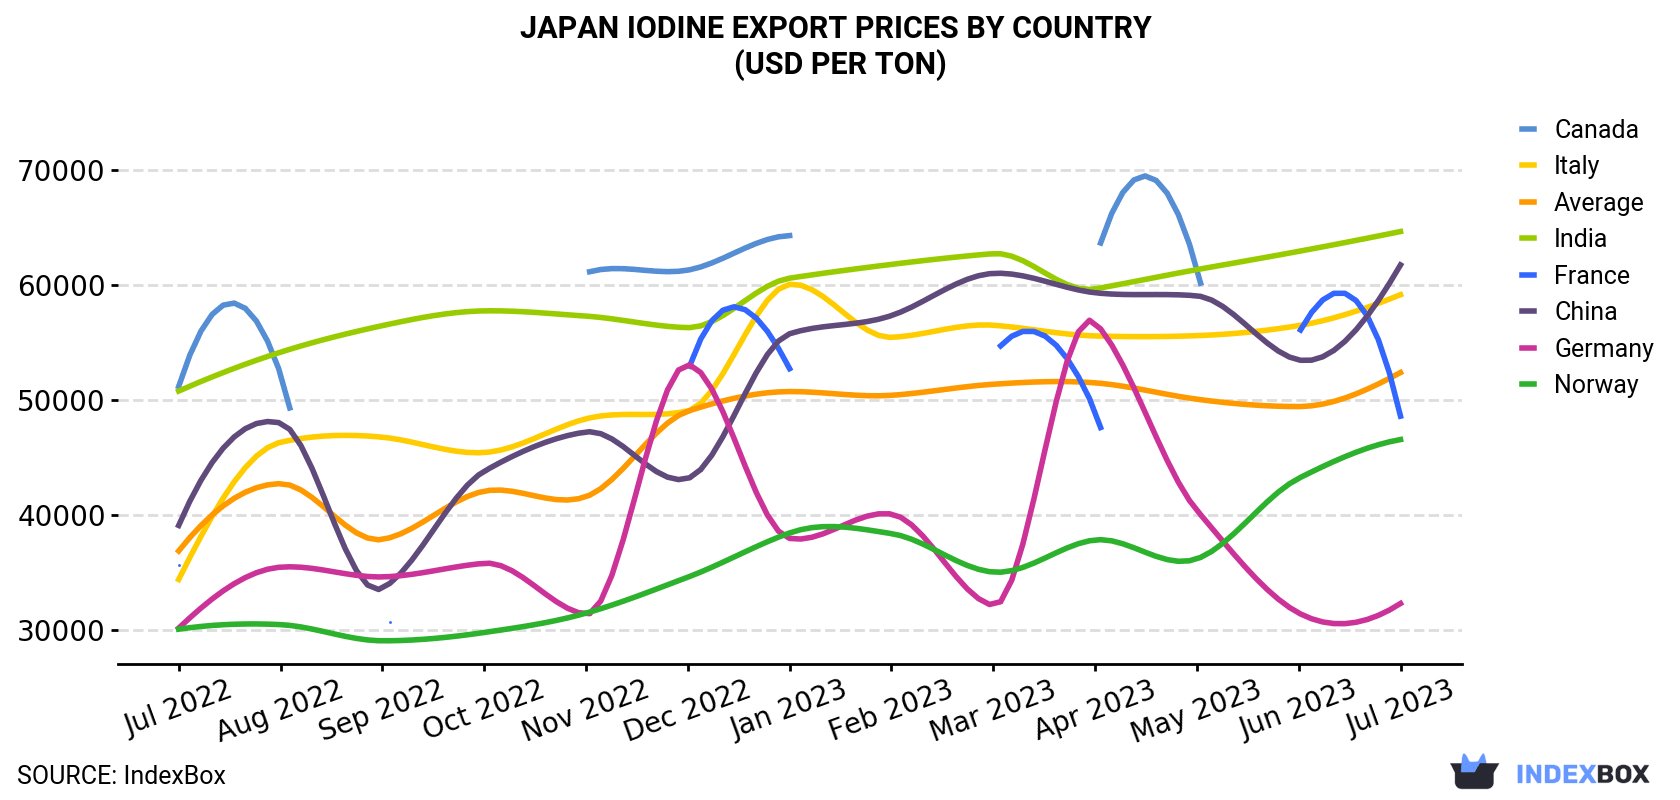 Japan Iodine Export Prices By Country (USD Per Ton)